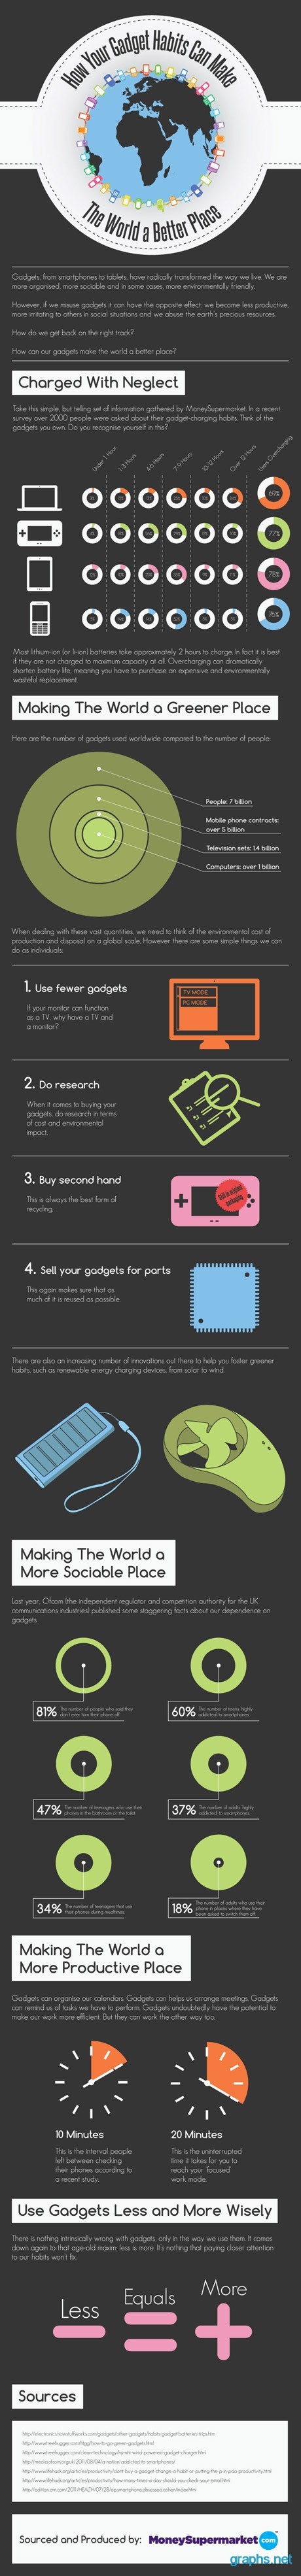 Facts about Gadgets